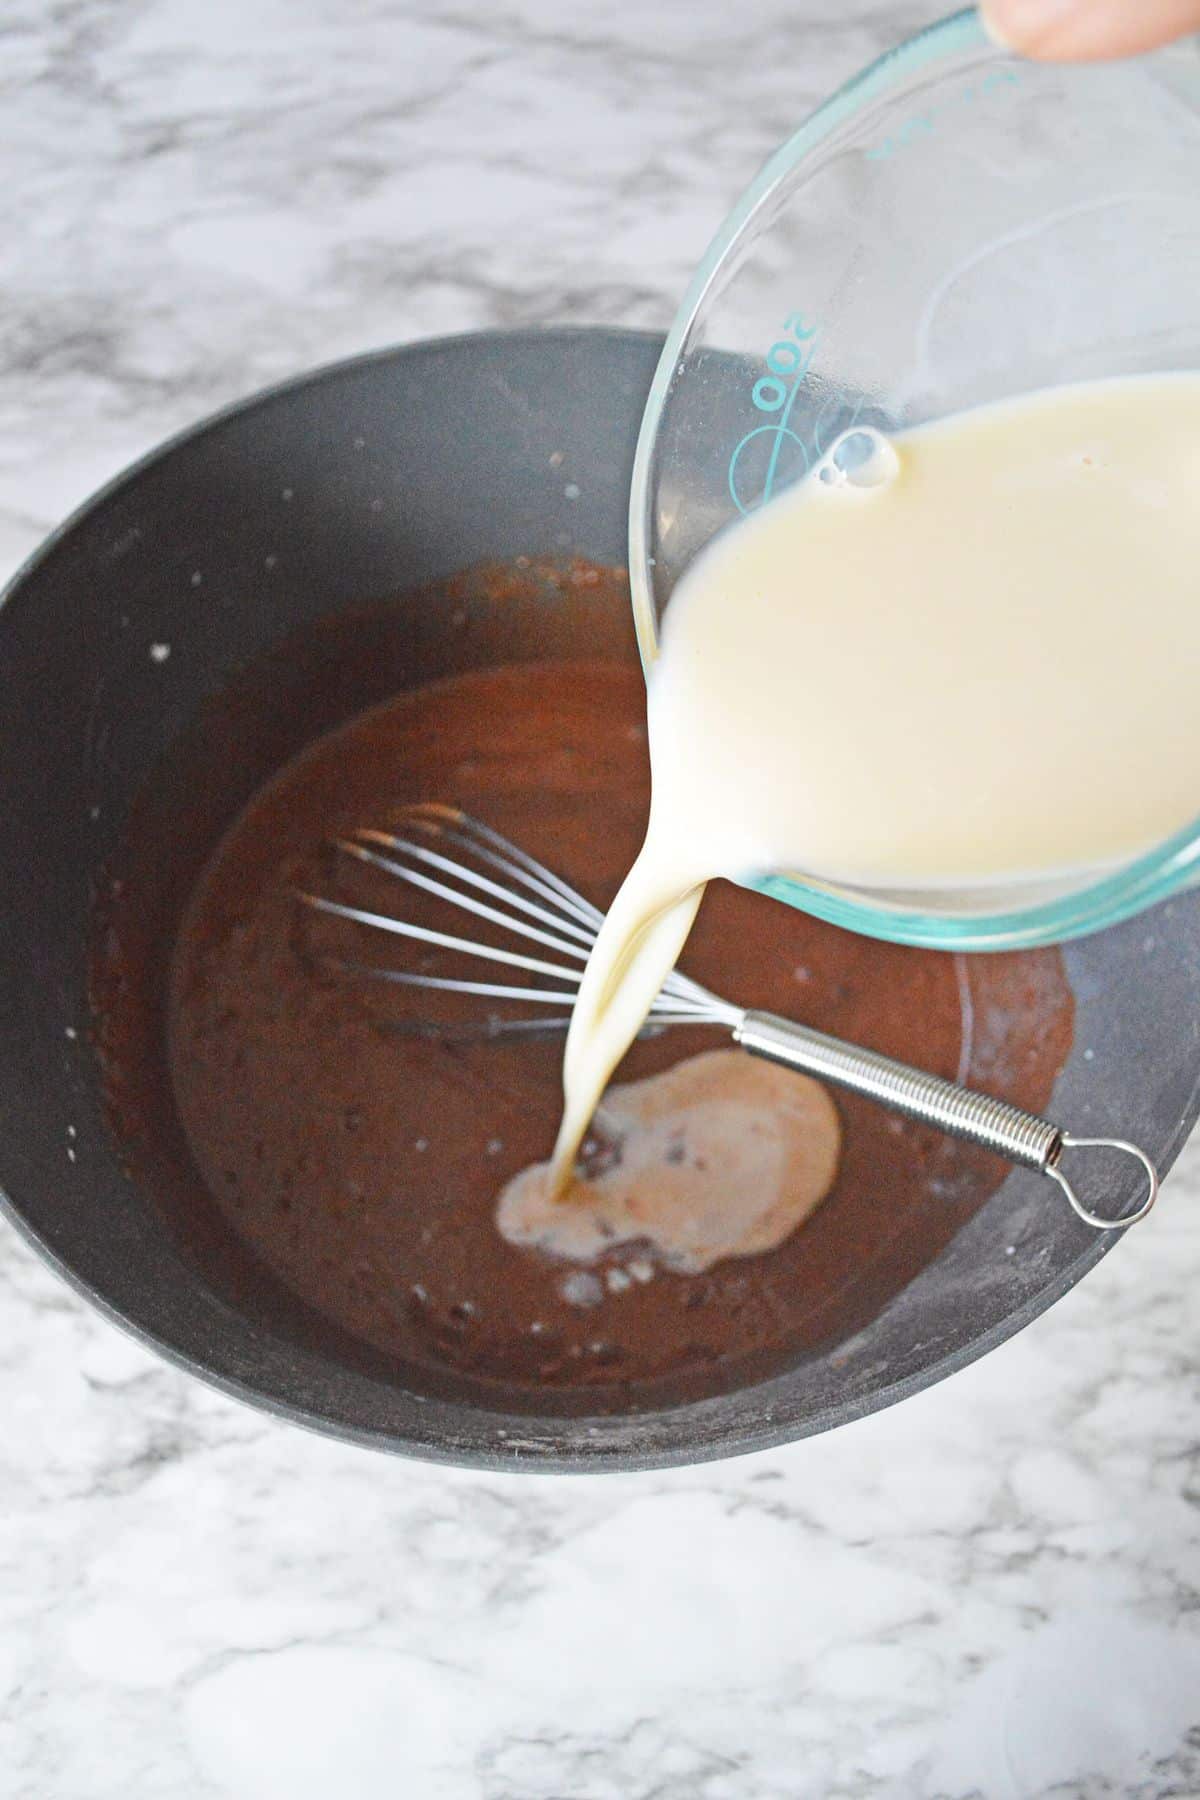 milk being poured into chocolate mixture